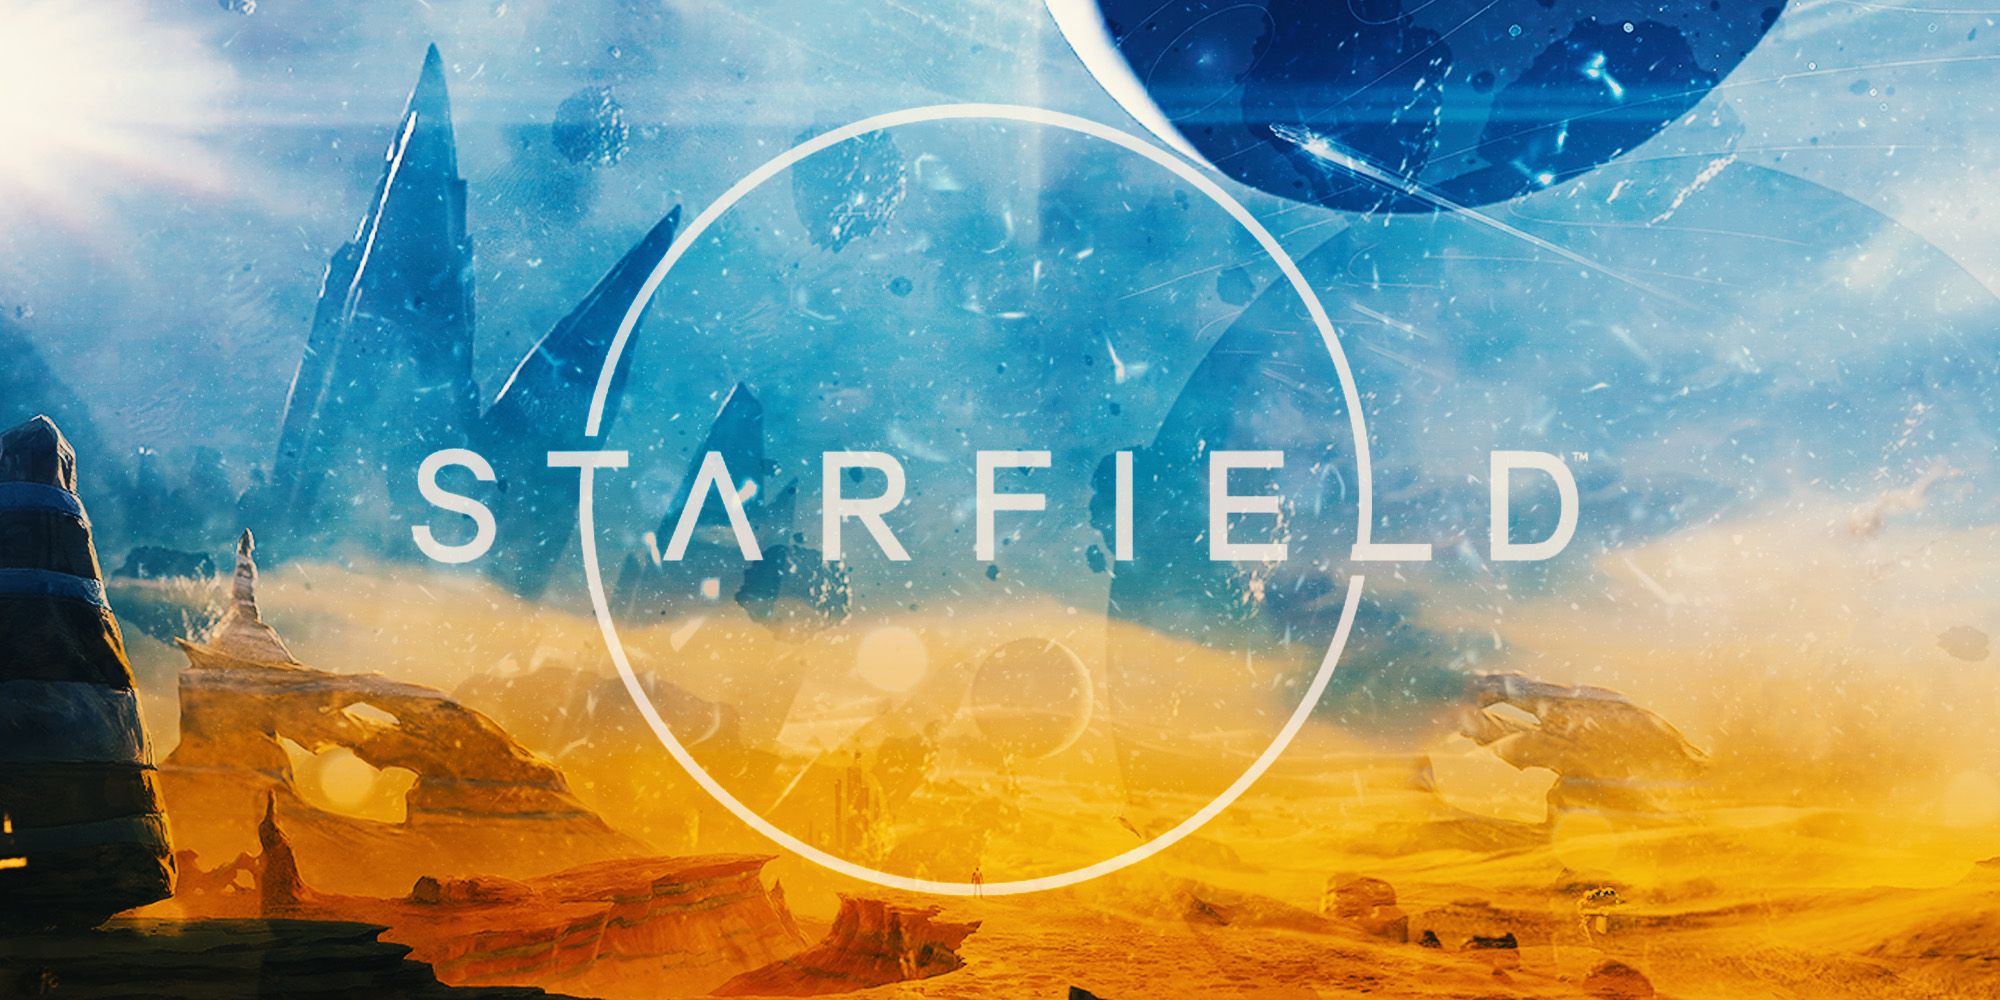 Bethesda's Starfield trailer could be a clue about The Elder